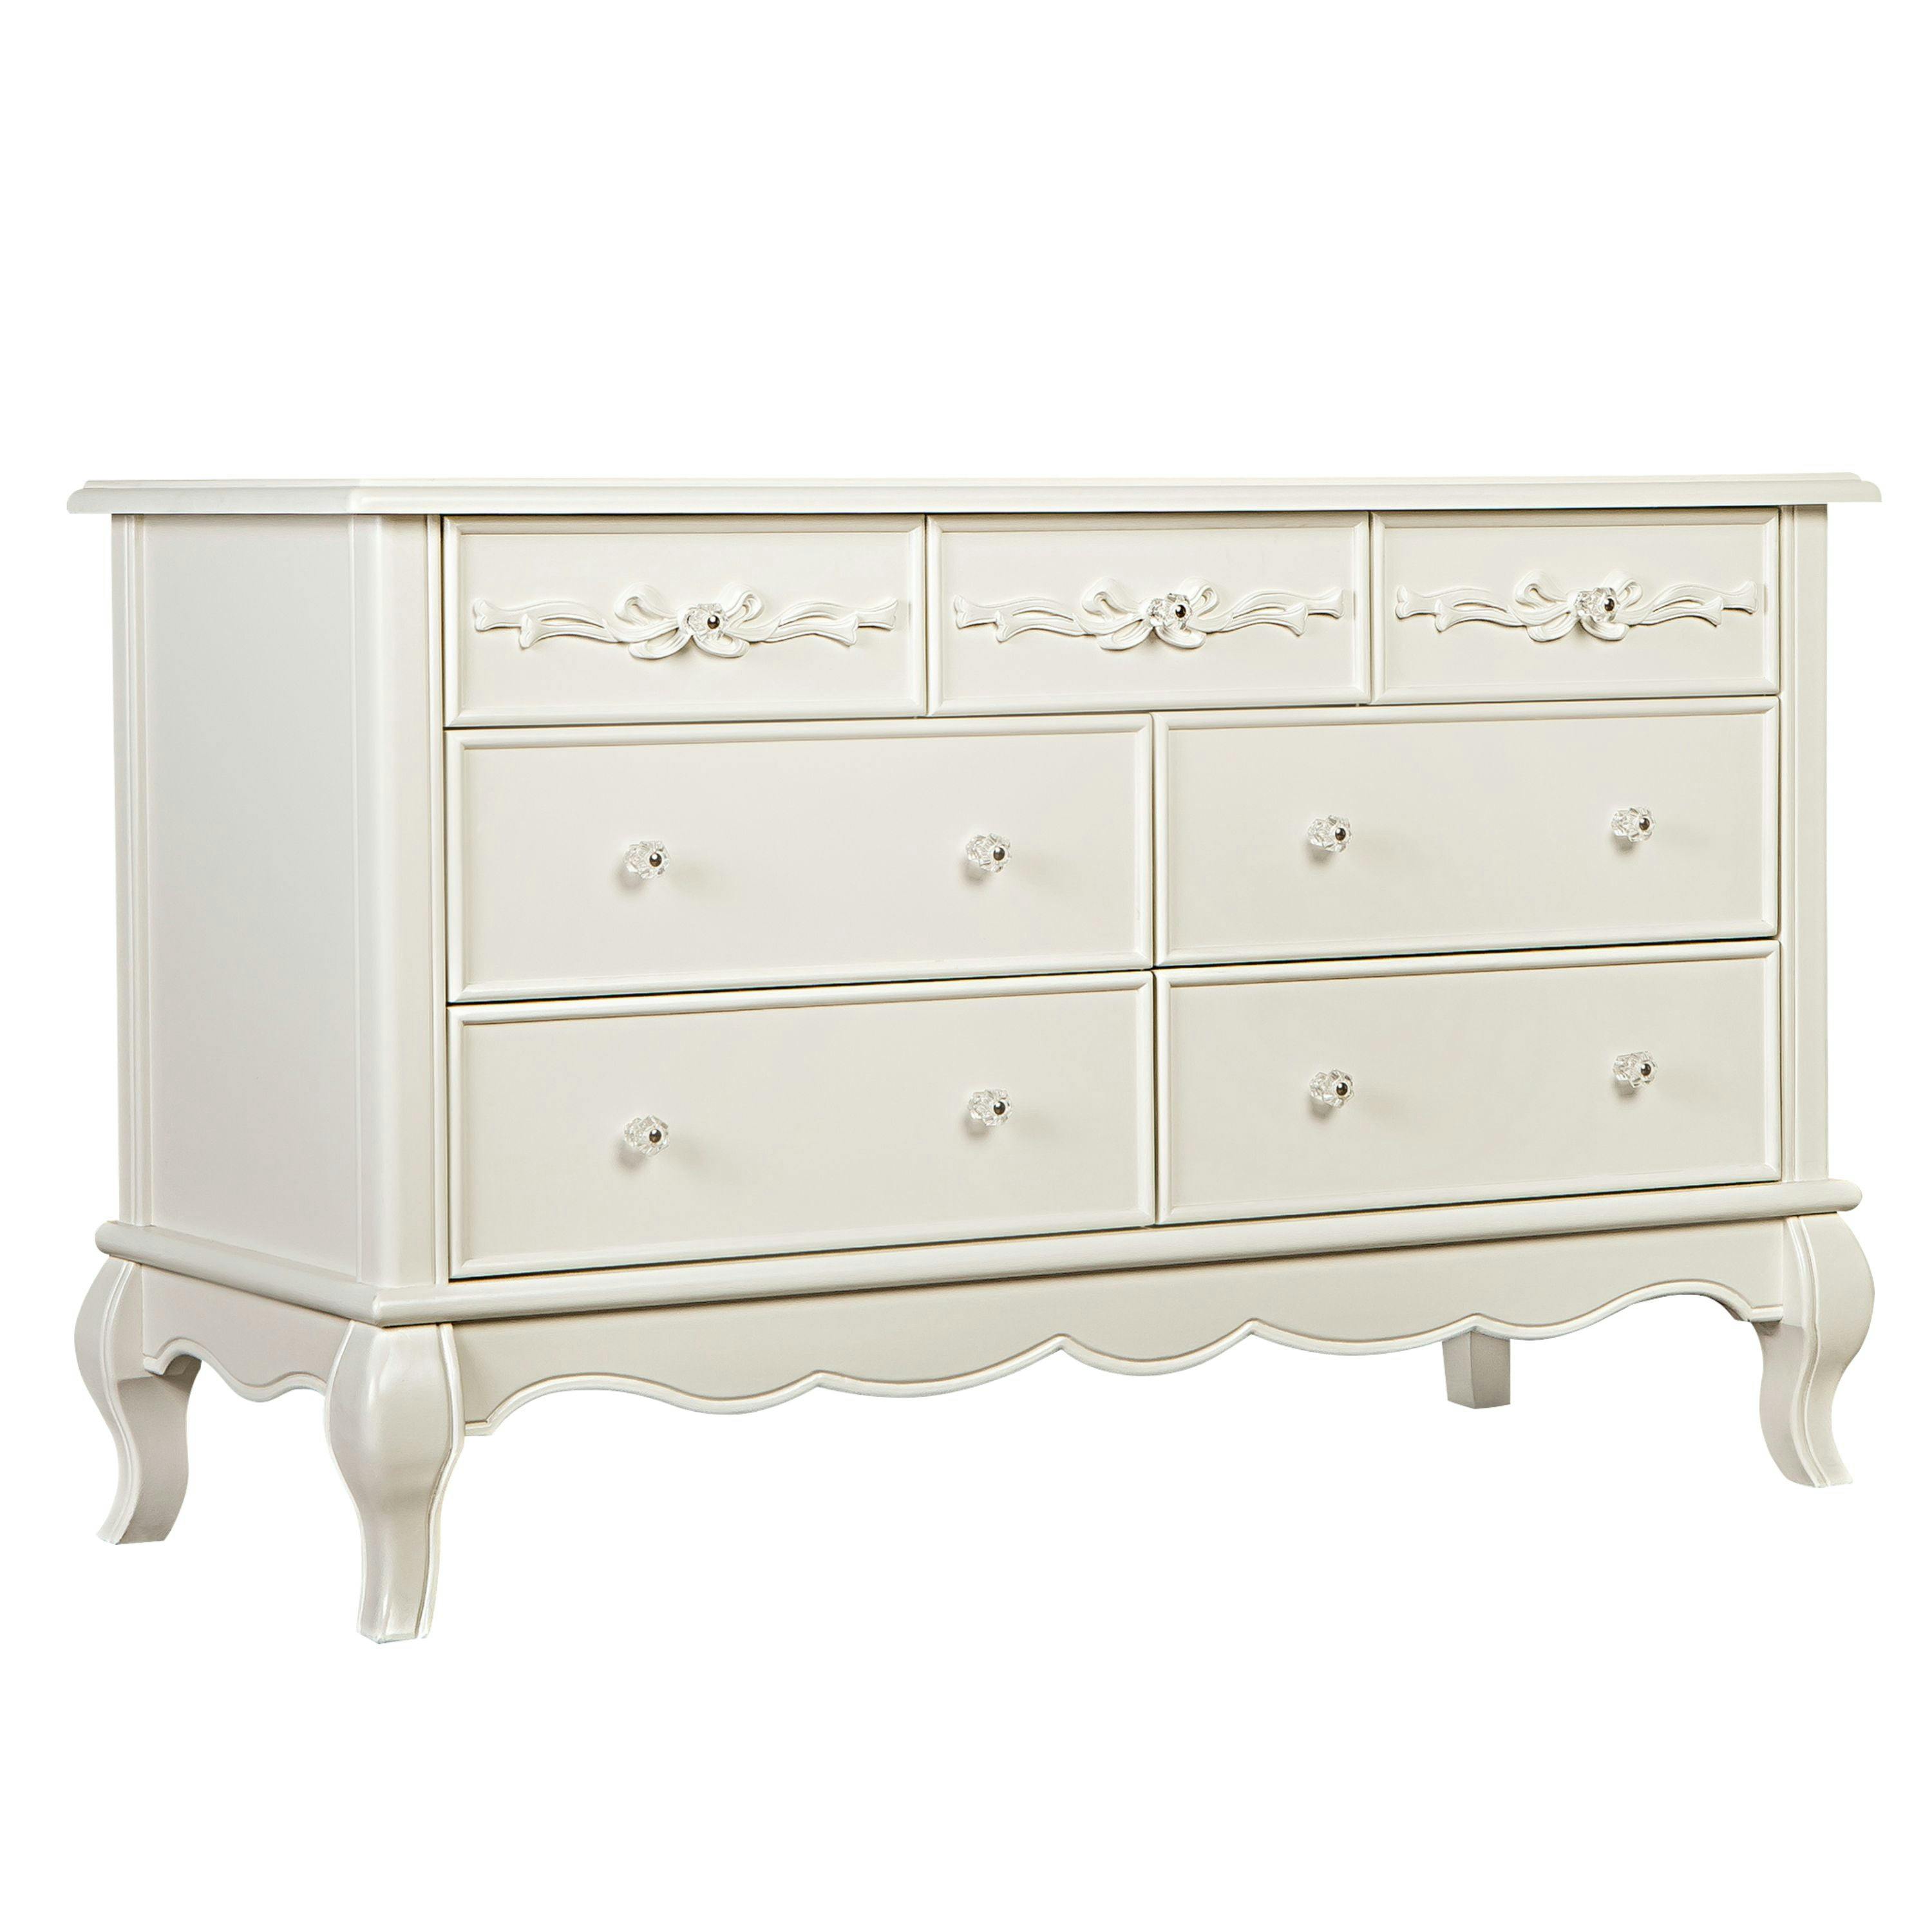 Enchanted Ivory Lace Double Dresser with Dovetail Drawers